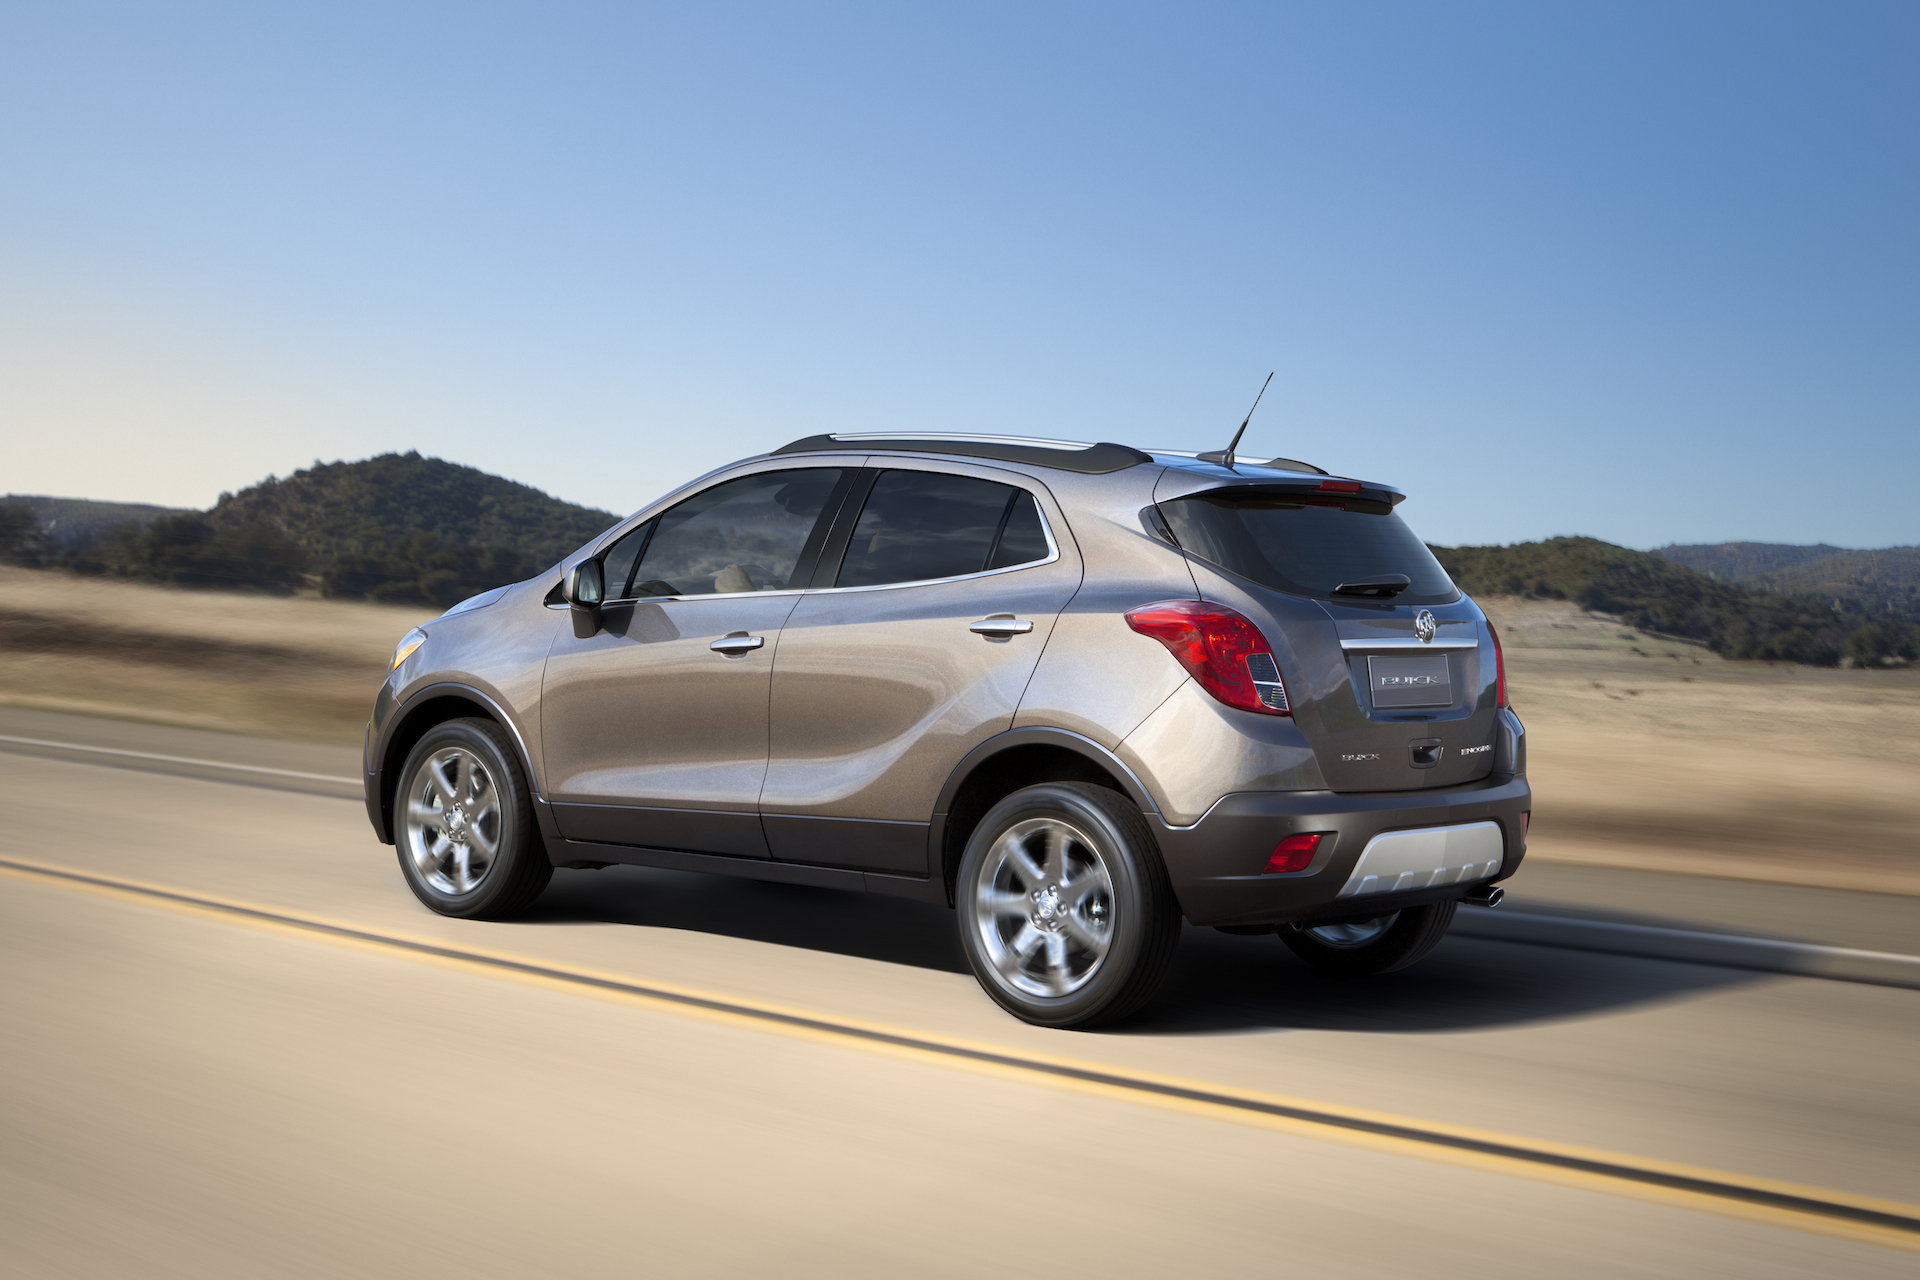 2015 Buick Encore Review, Ratings, Specs, Prices, and Photos - The Car